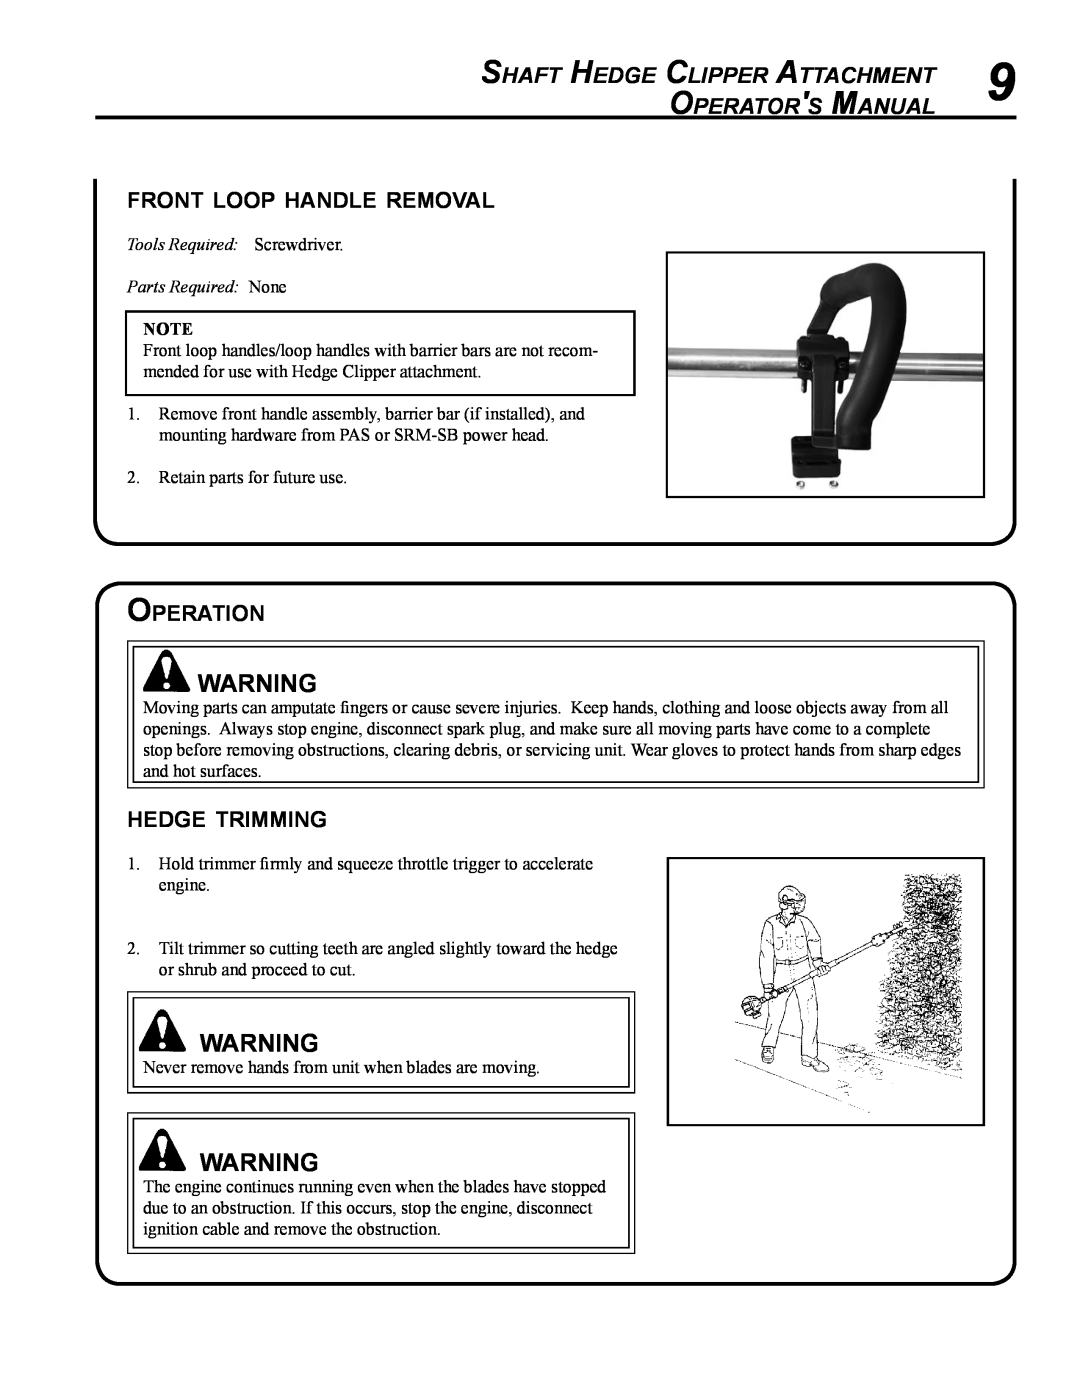 Echo 99944200485 Shaft Hedge Clipper Attachment, Operator s Manual, front loop handle removal, Operation, hedge trimming 